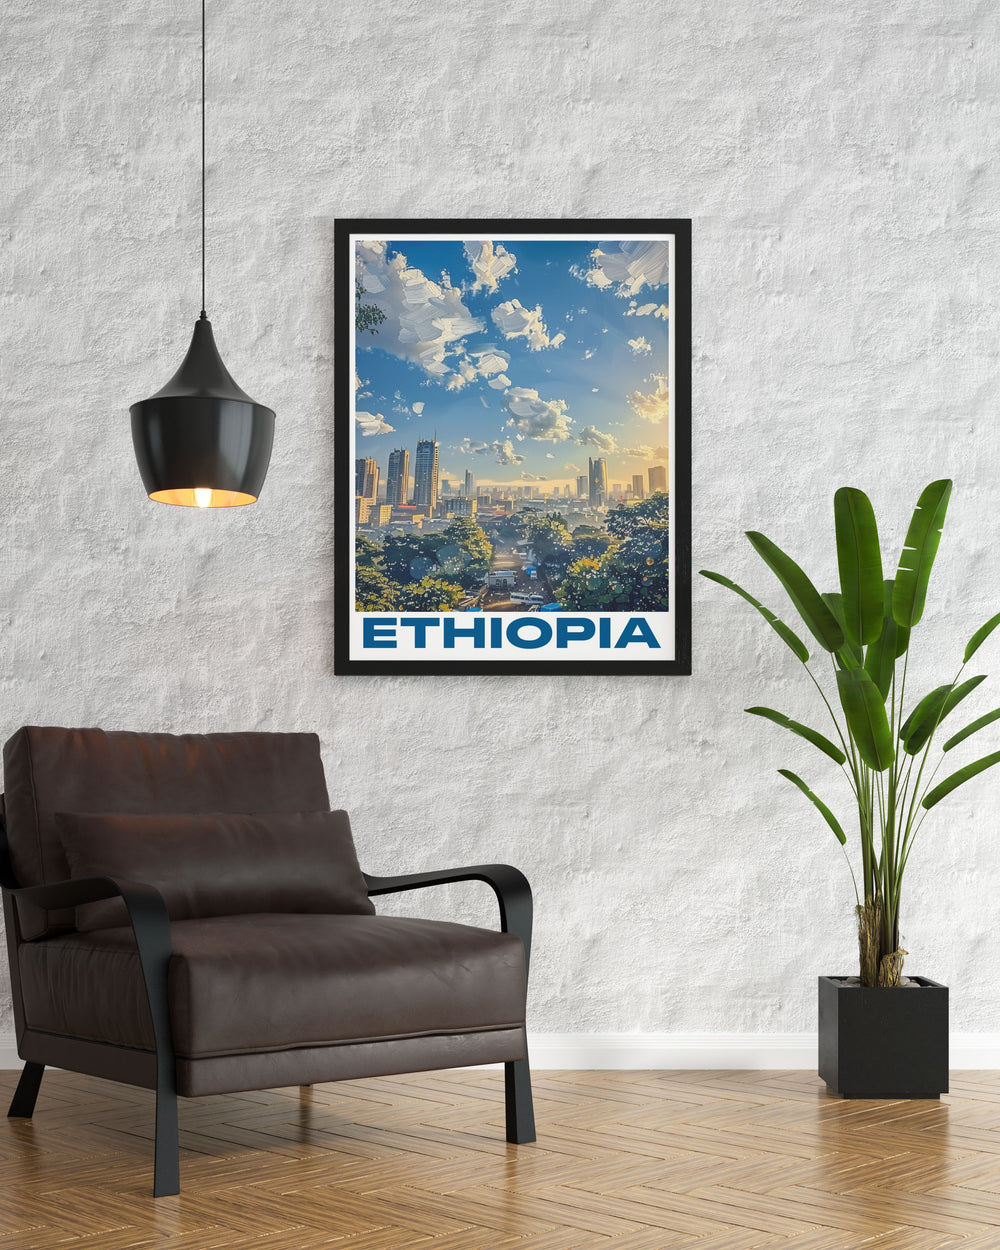 Stunning Ethiopia Wall Art showcasing Addis Ababas dynamic streets and vibrant atmosphere meticulously crafted with vivid colors and fine lines ideal for enhancing living rooms offices or bedrooms with a touch of Ethiopian heritage